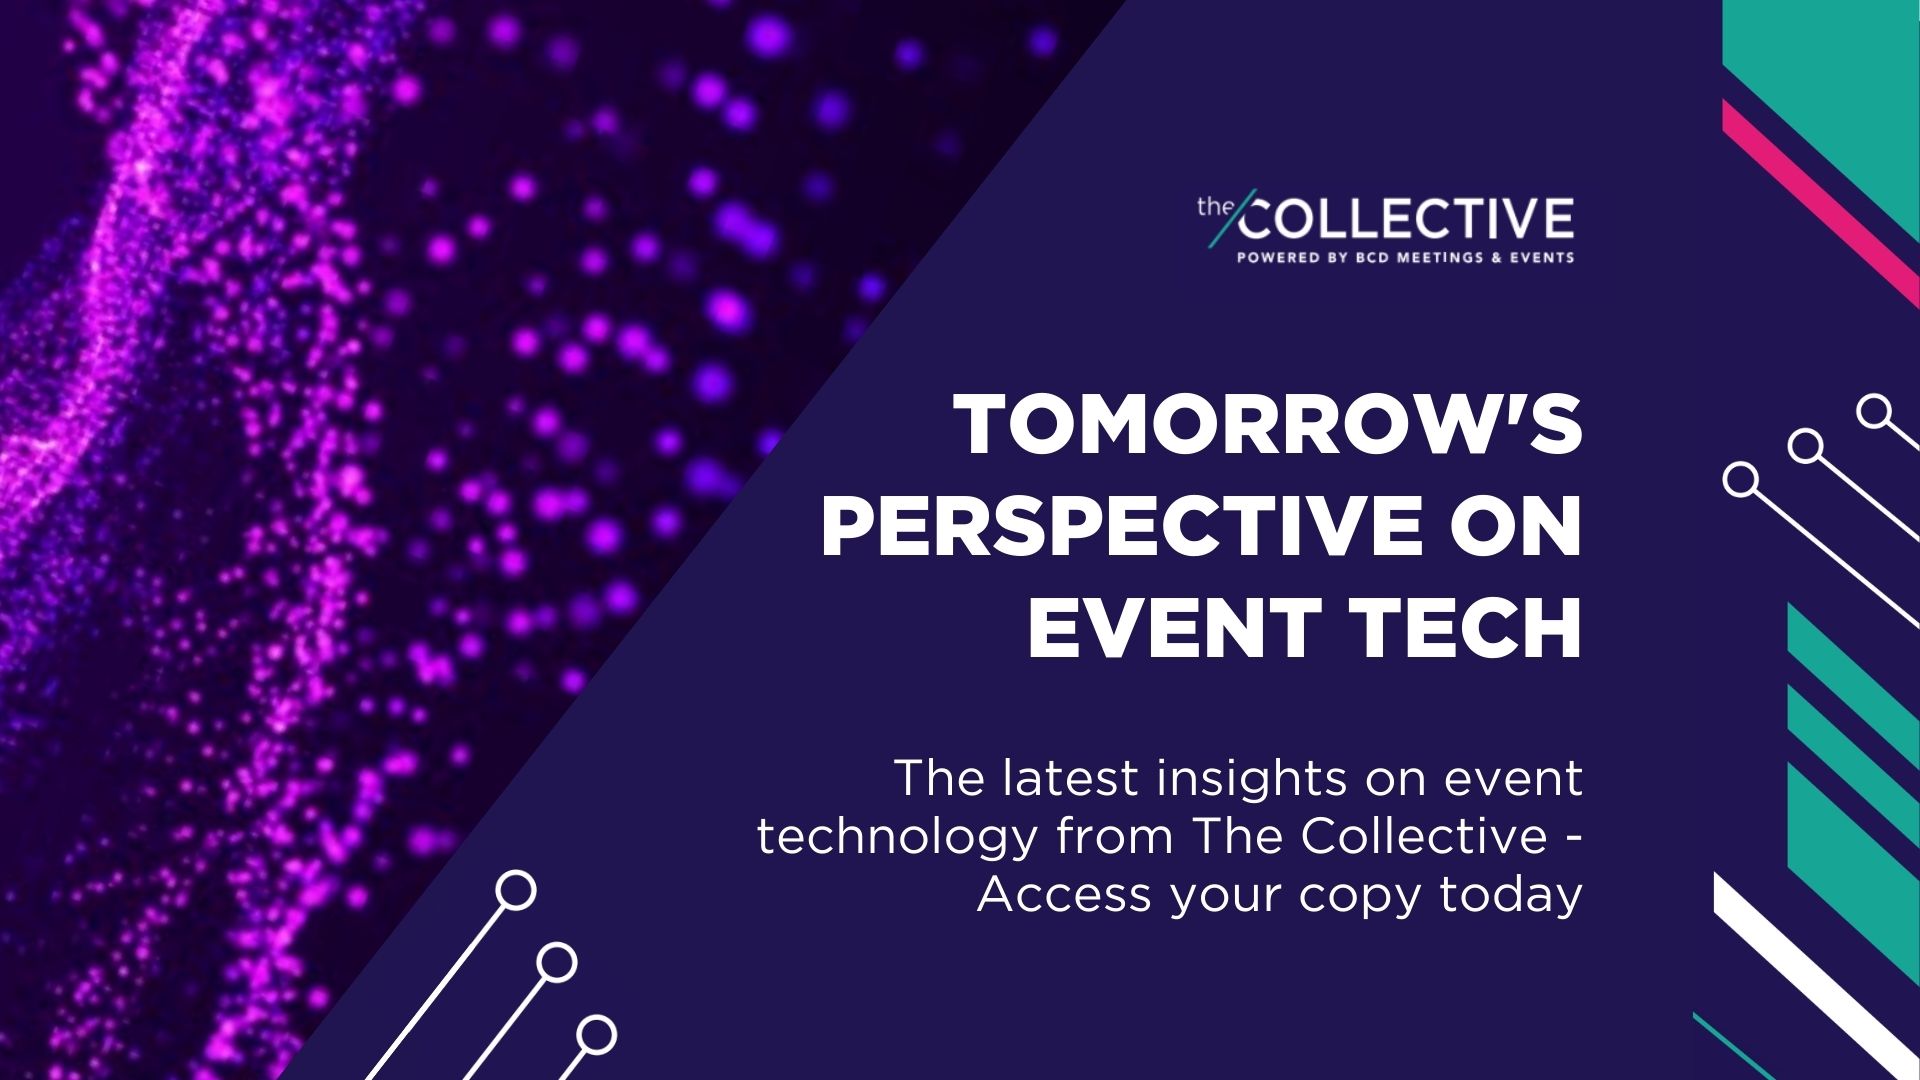 The latest insights on event technology from The Collective